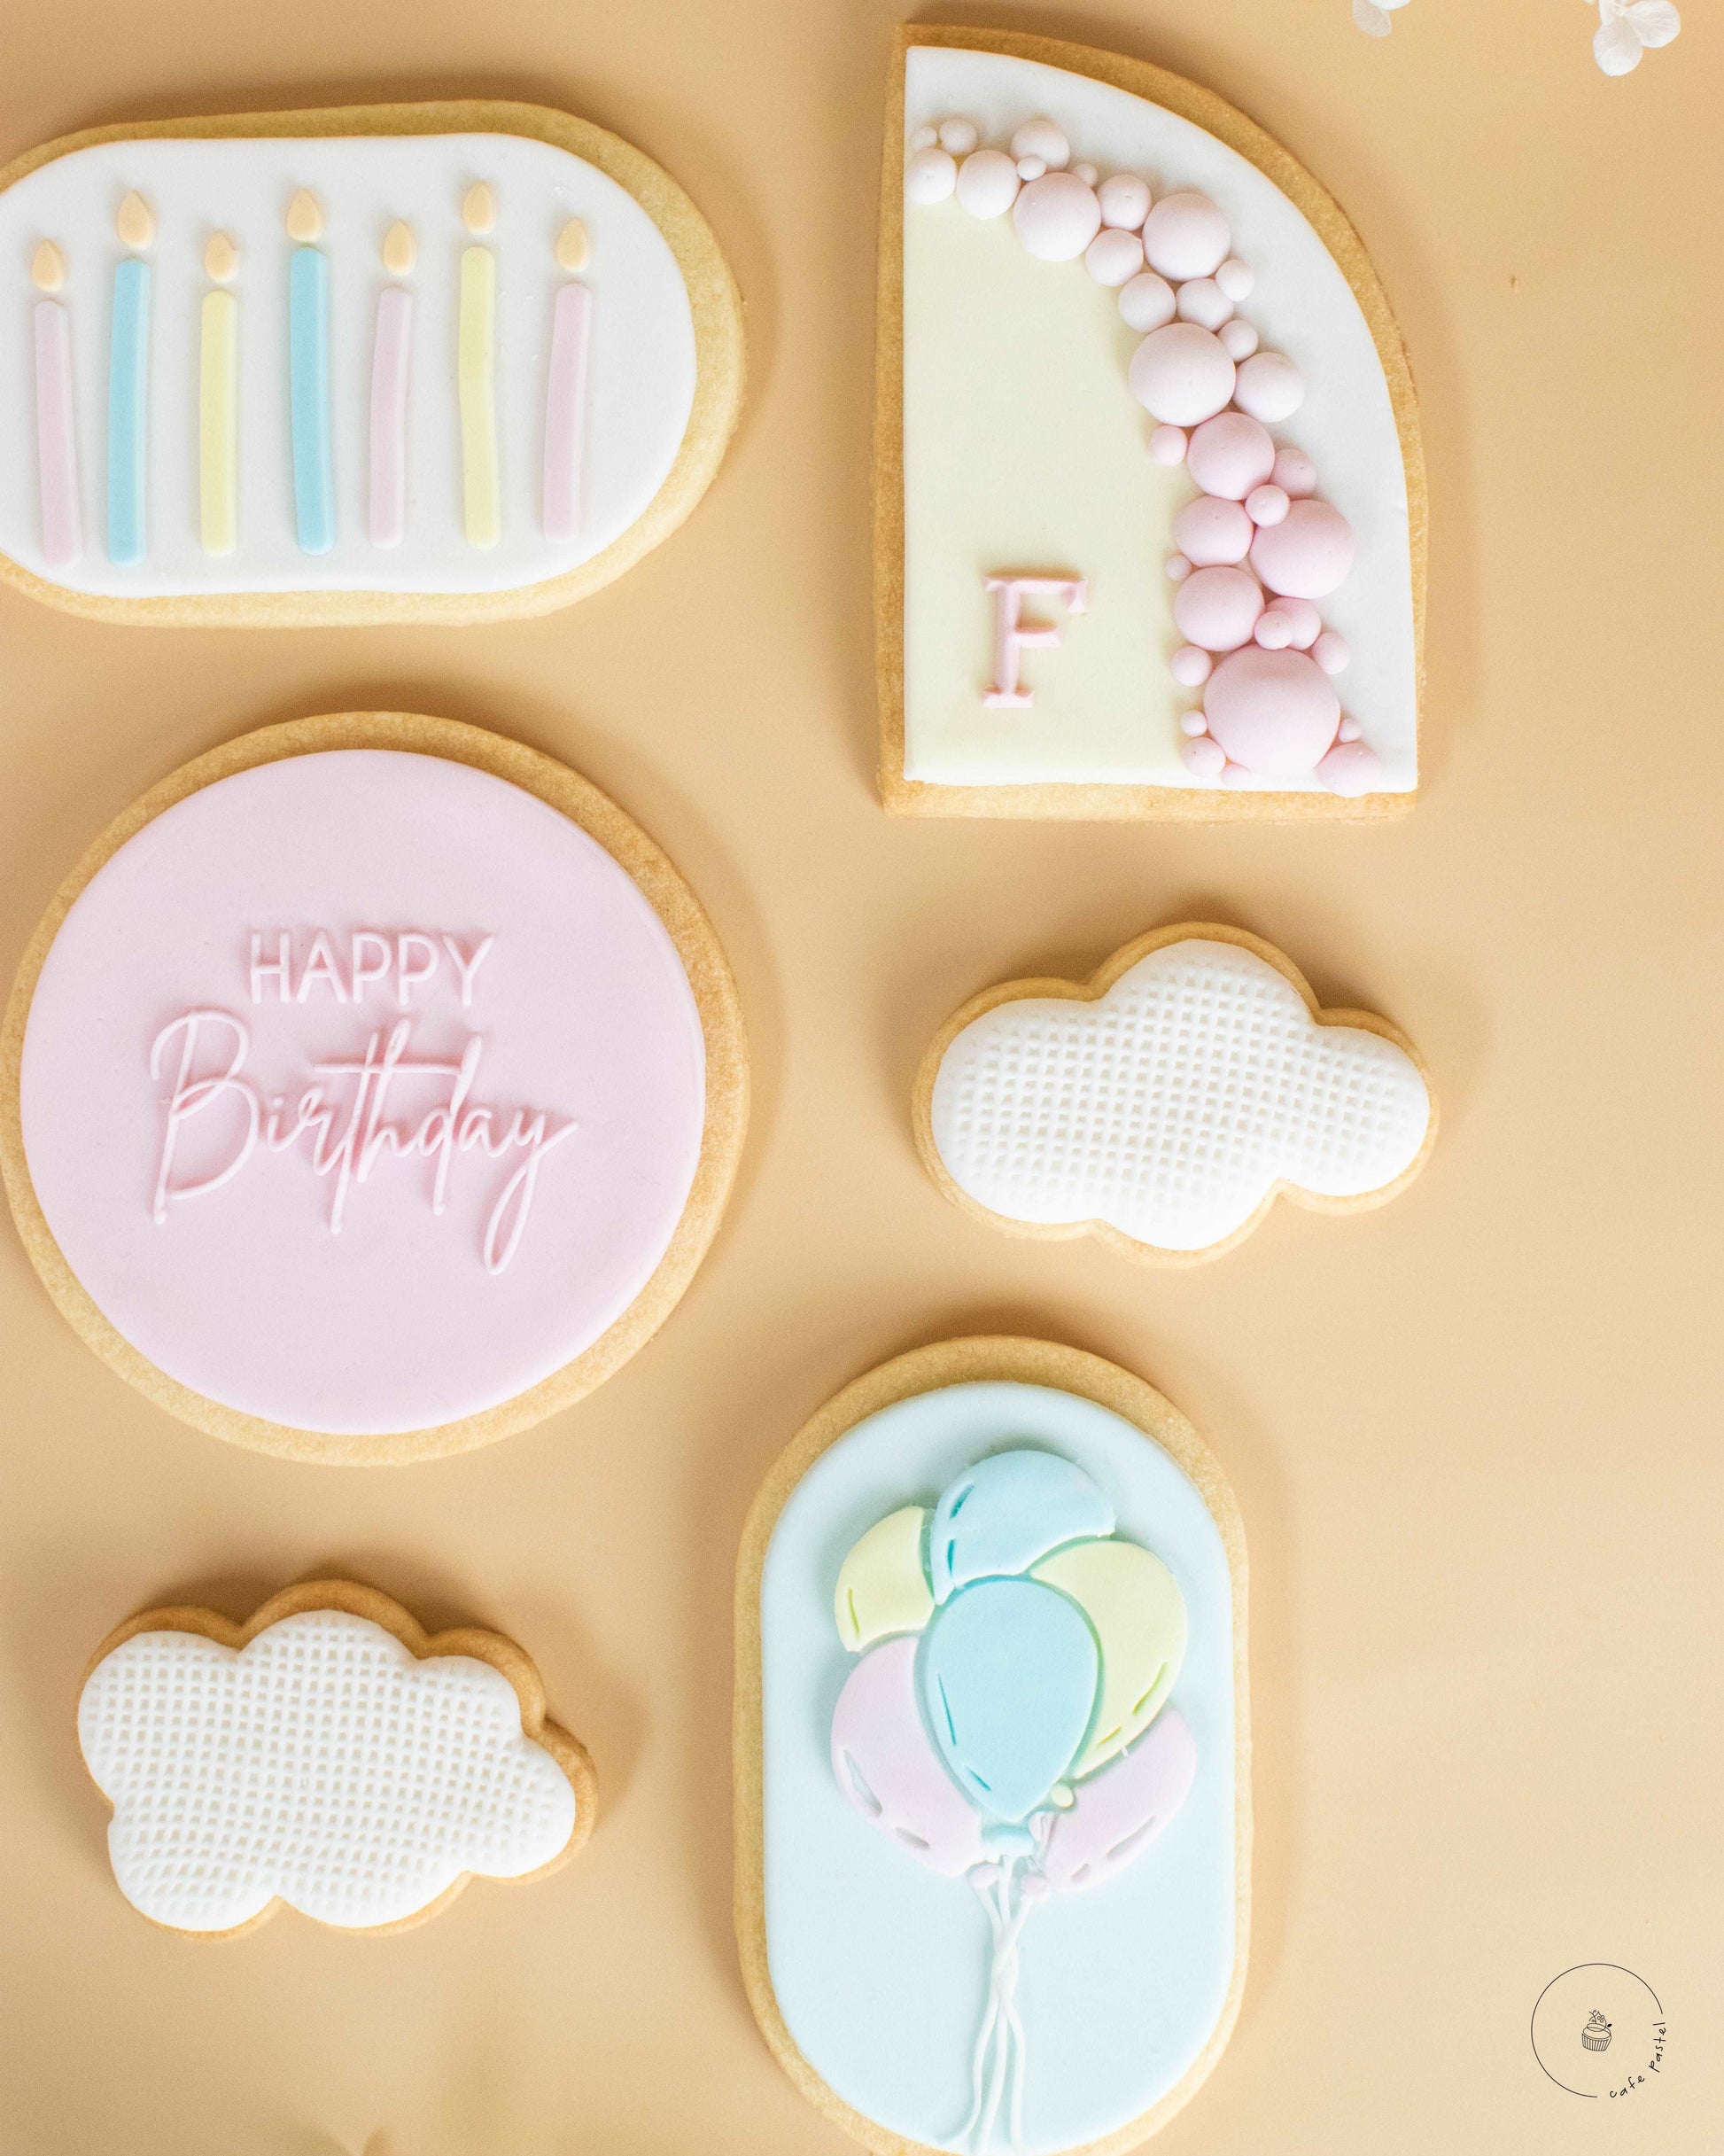 Birthday Cookies. Round cookie with caption Happy Birthday, oval cookie with birthday candles, cloud-shaped cookies, oval cookie with balloons  